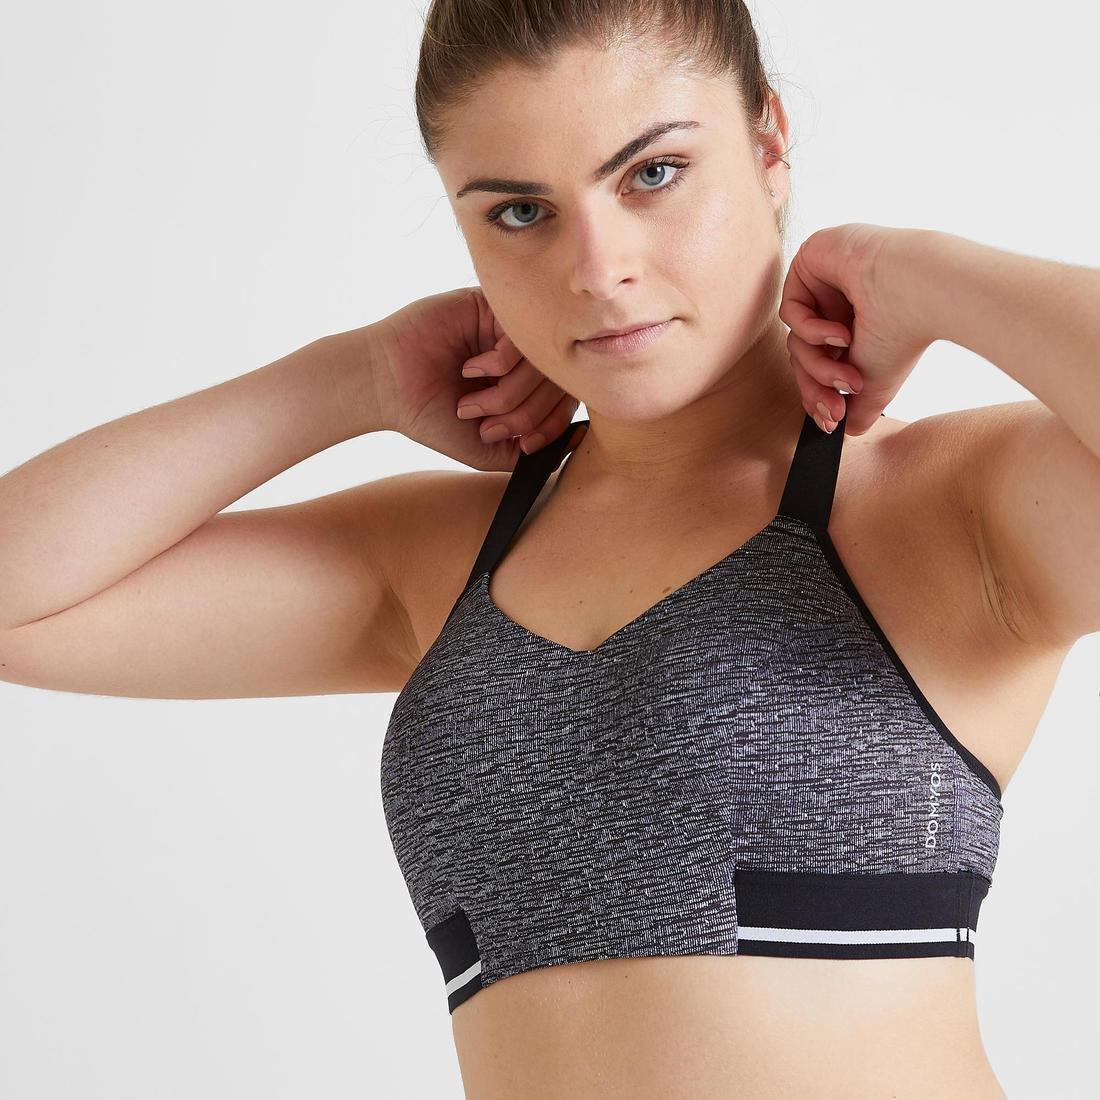 DOMYOS Moderate Support Fitness Sports Bra 500, Grey